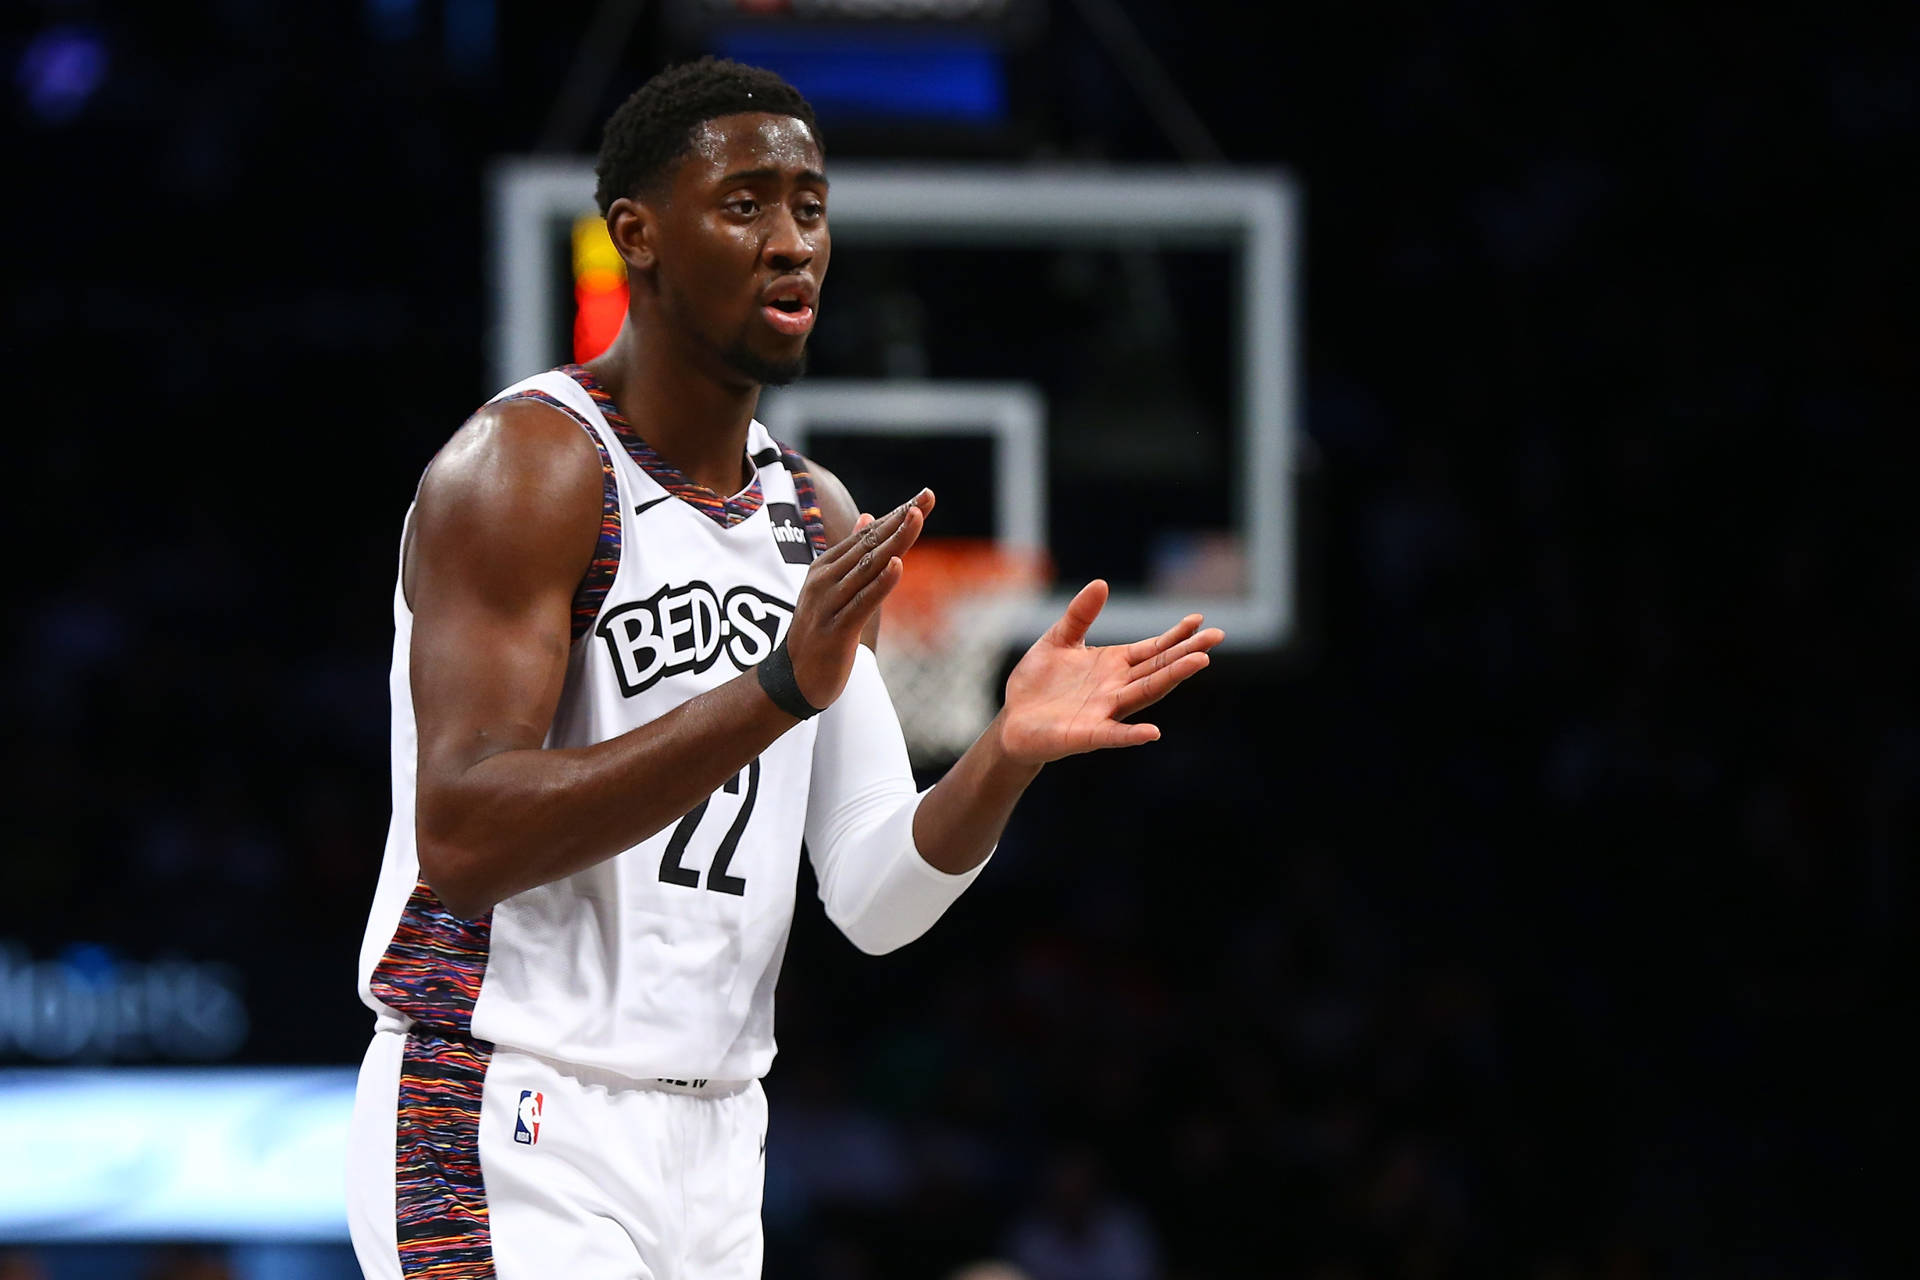 Caris Levert Energetically Clapping On The Basketball Court Background